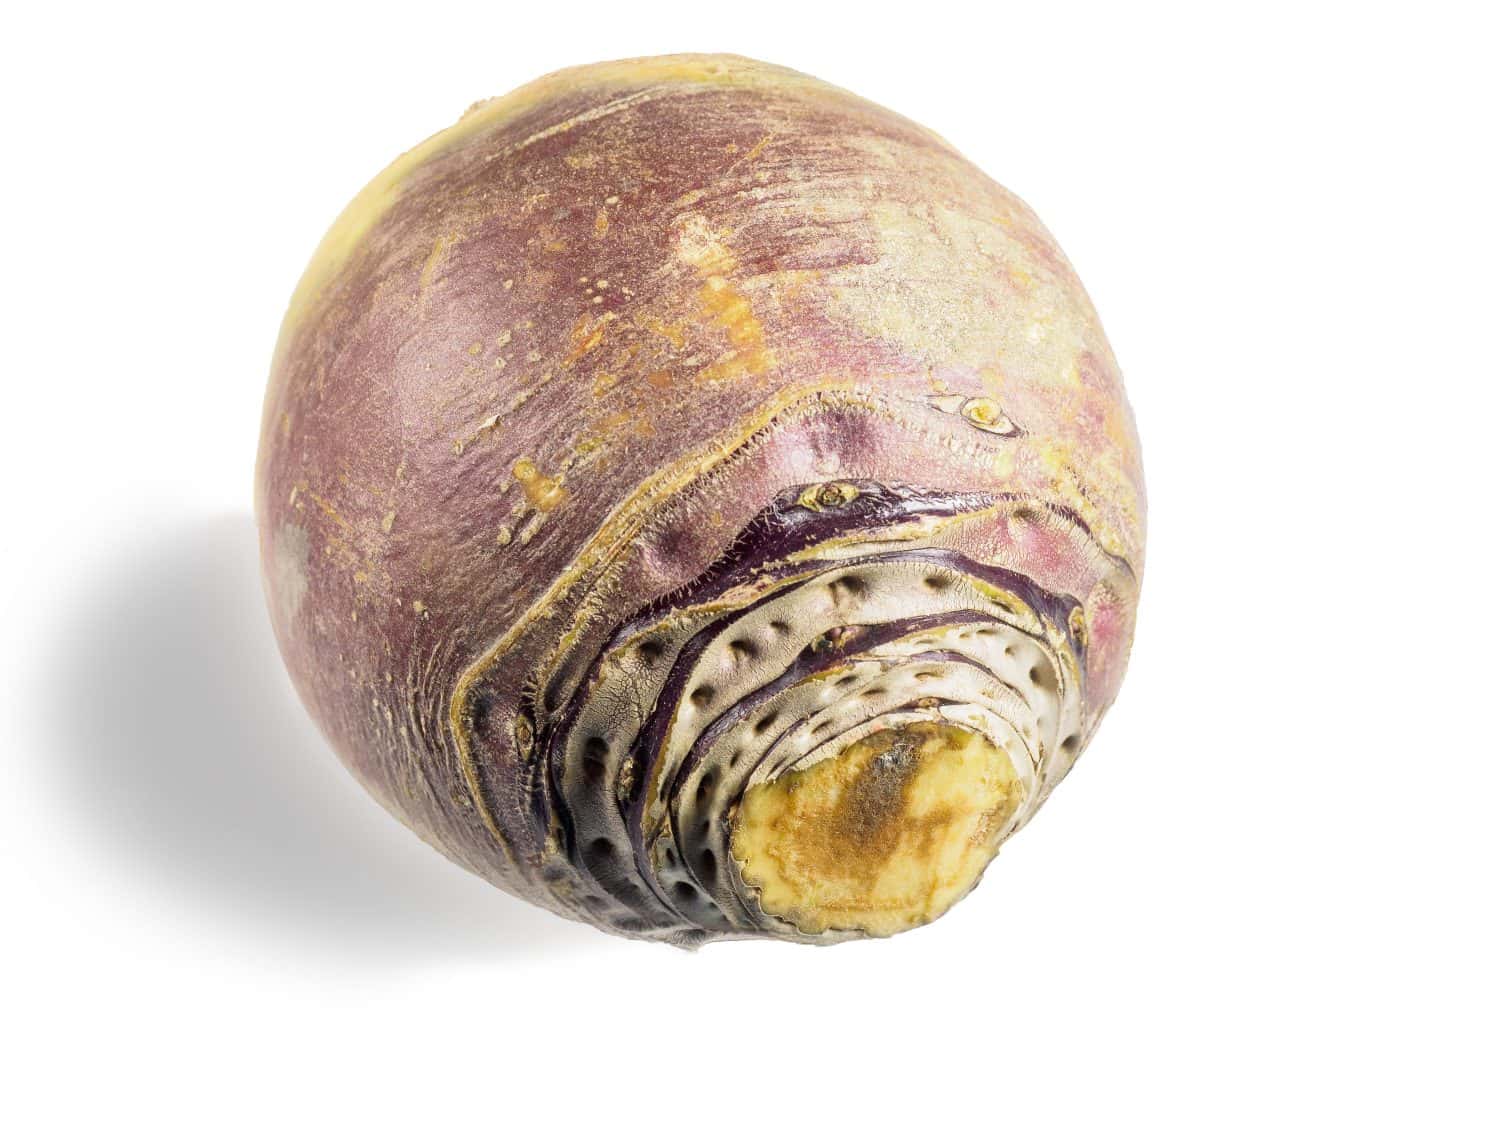 Rutabaga root on the white background